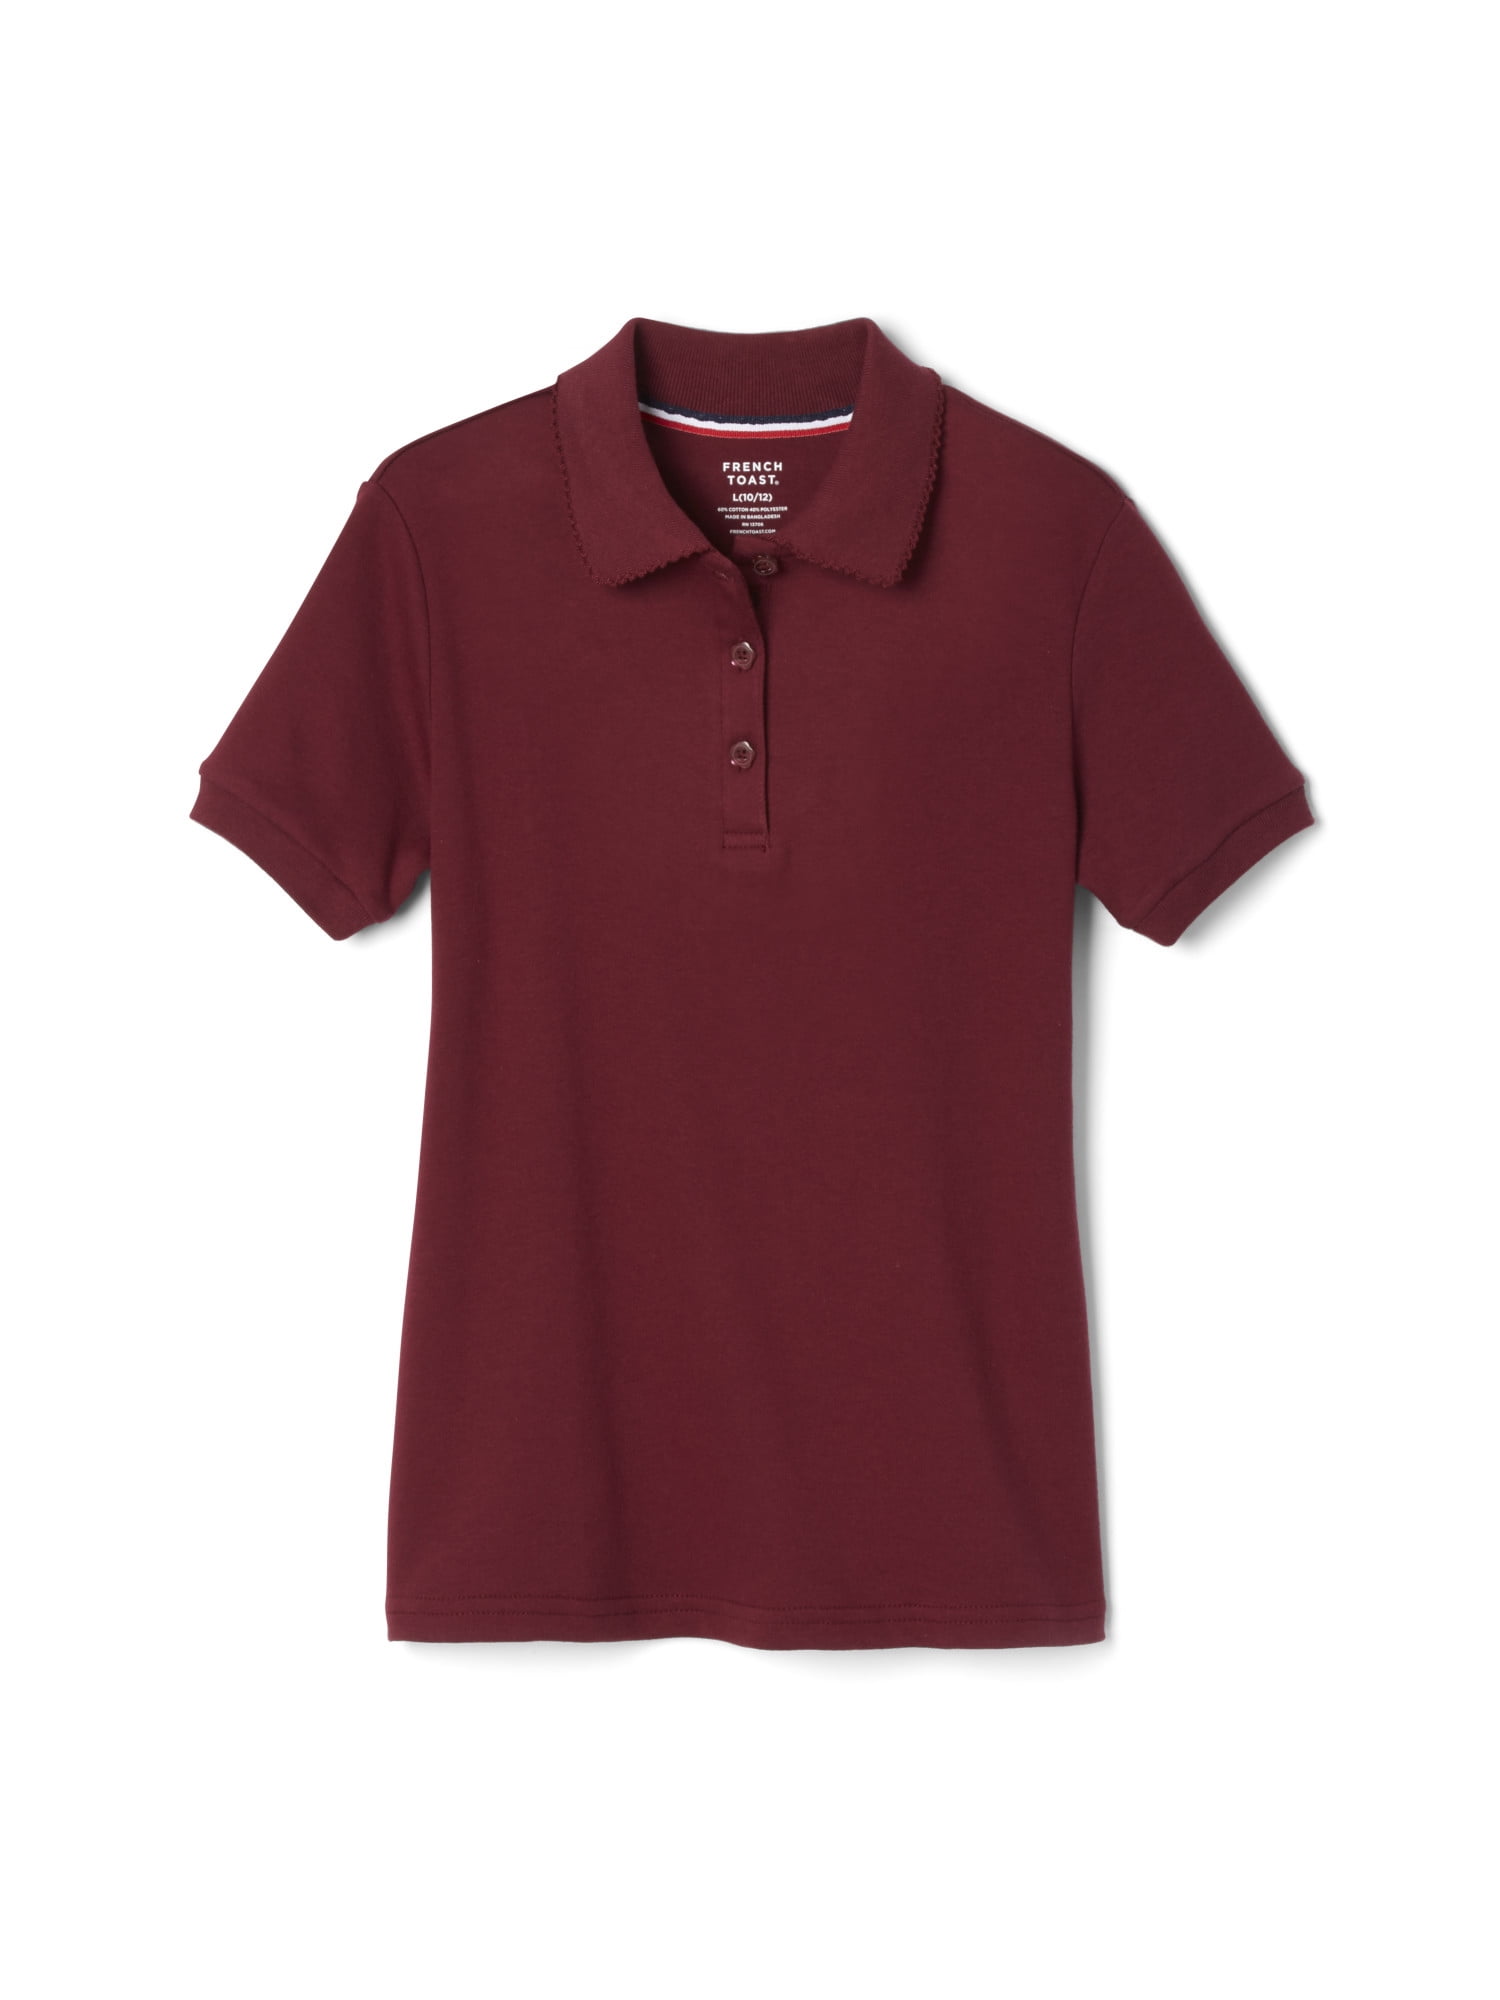 6X Burgundy French Toast Girls S/S Pique Polo Shirt with Picot Trim Collar 